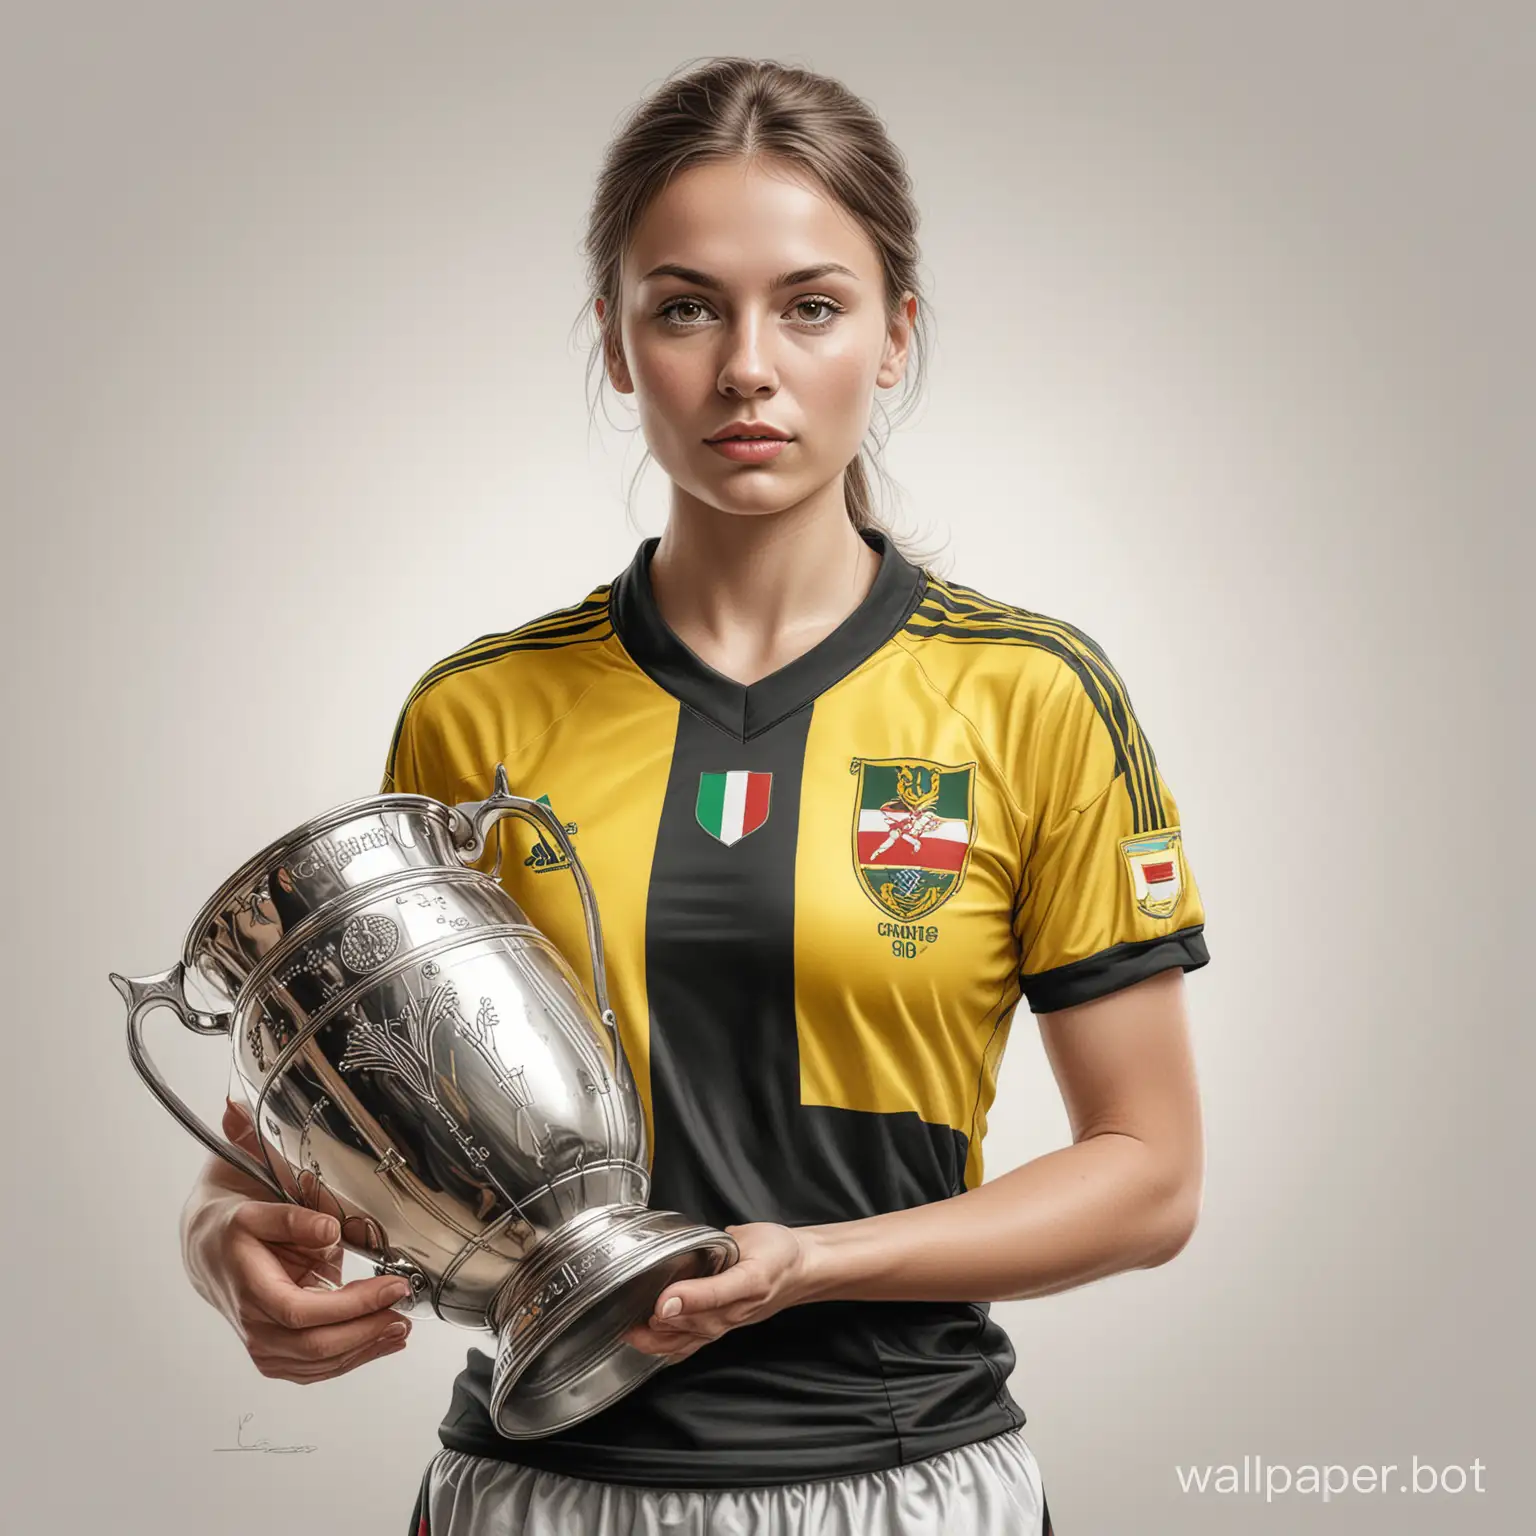 Sketch of a young Hungarian woman size 6 chest narrow waist in black and yellow soccer uniform holding a large champions cup on a white background highly realistic drawing with colored liner